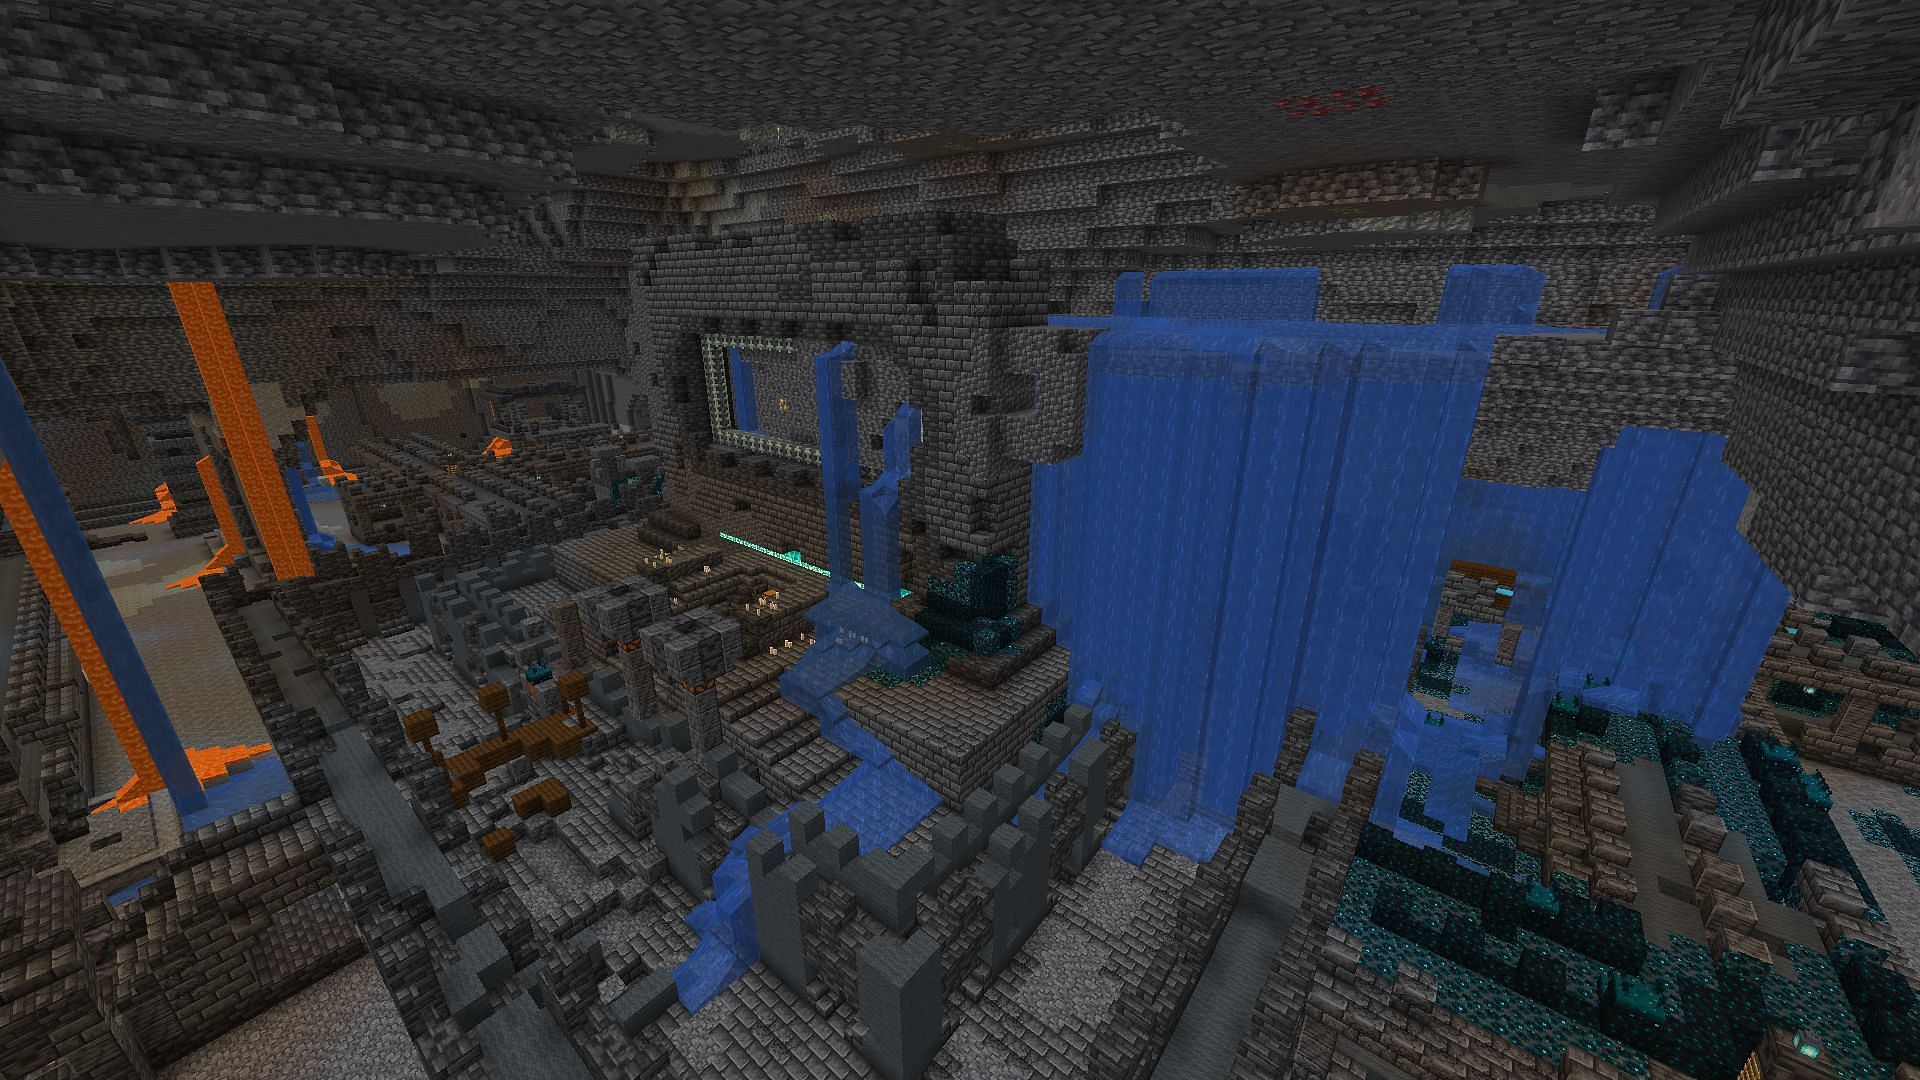 The waterlogged city found in this world (Image via Minecraft)